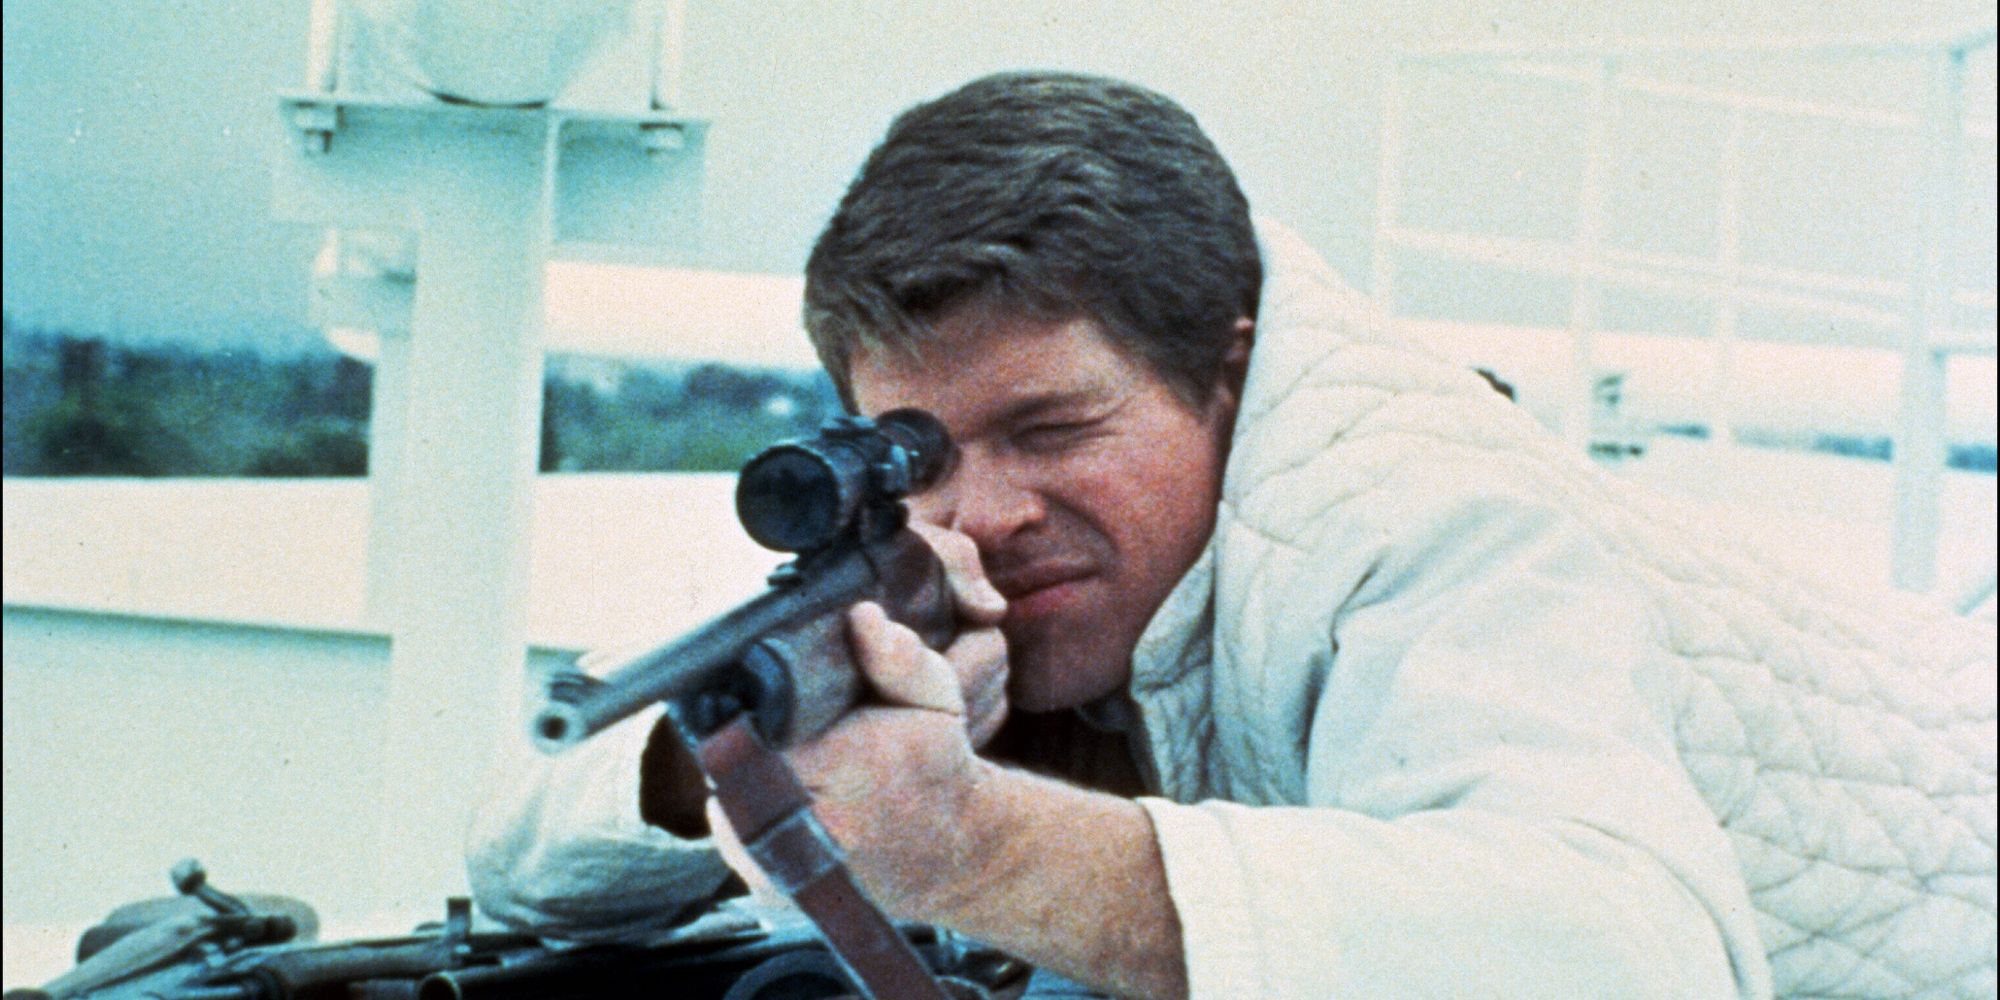 Tim O'Kelly as Bobby Thompson in Targets